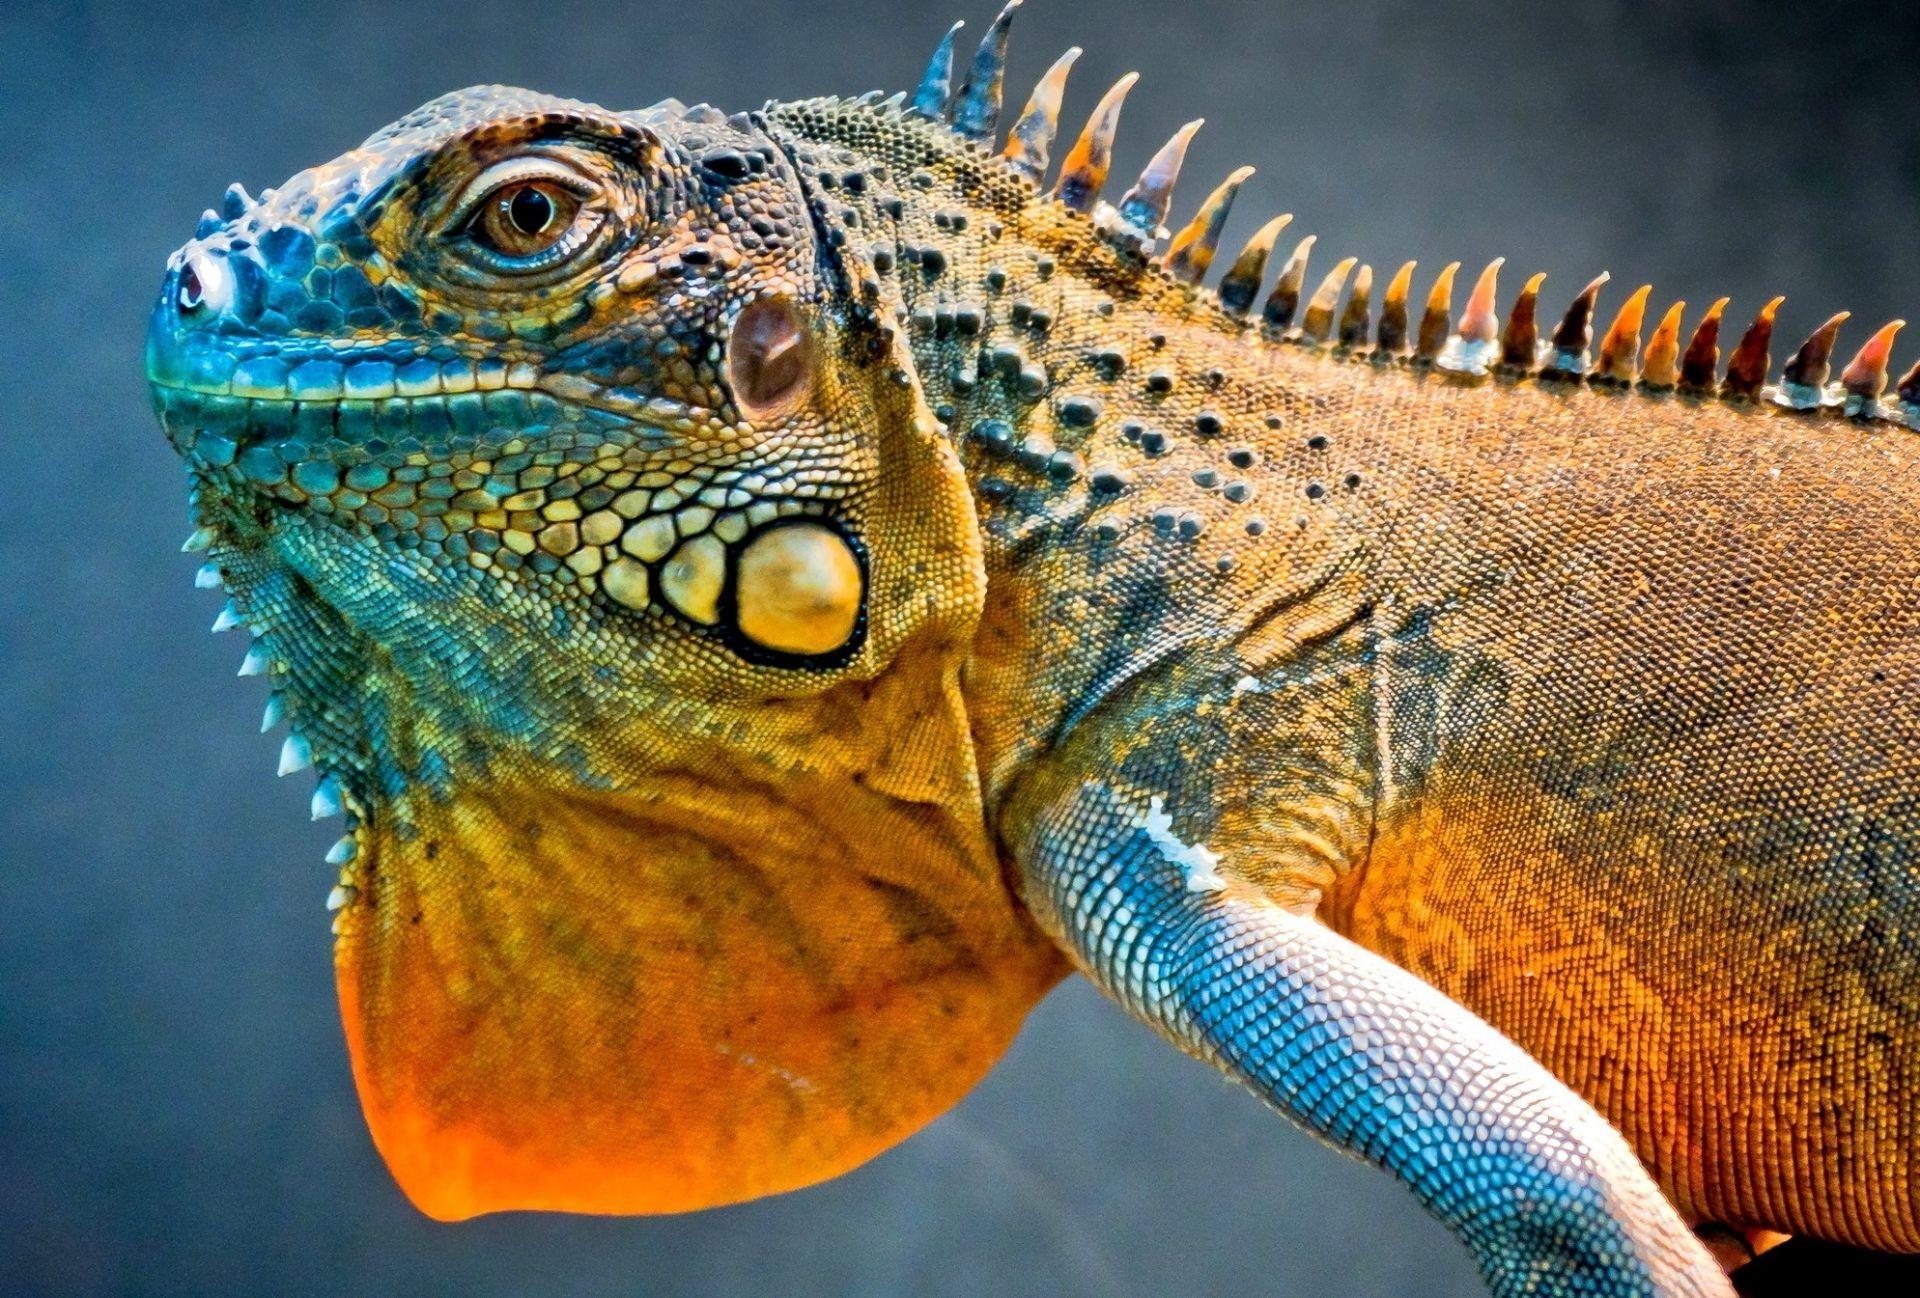 Lizard dragon iguana. Android wallpaper for free